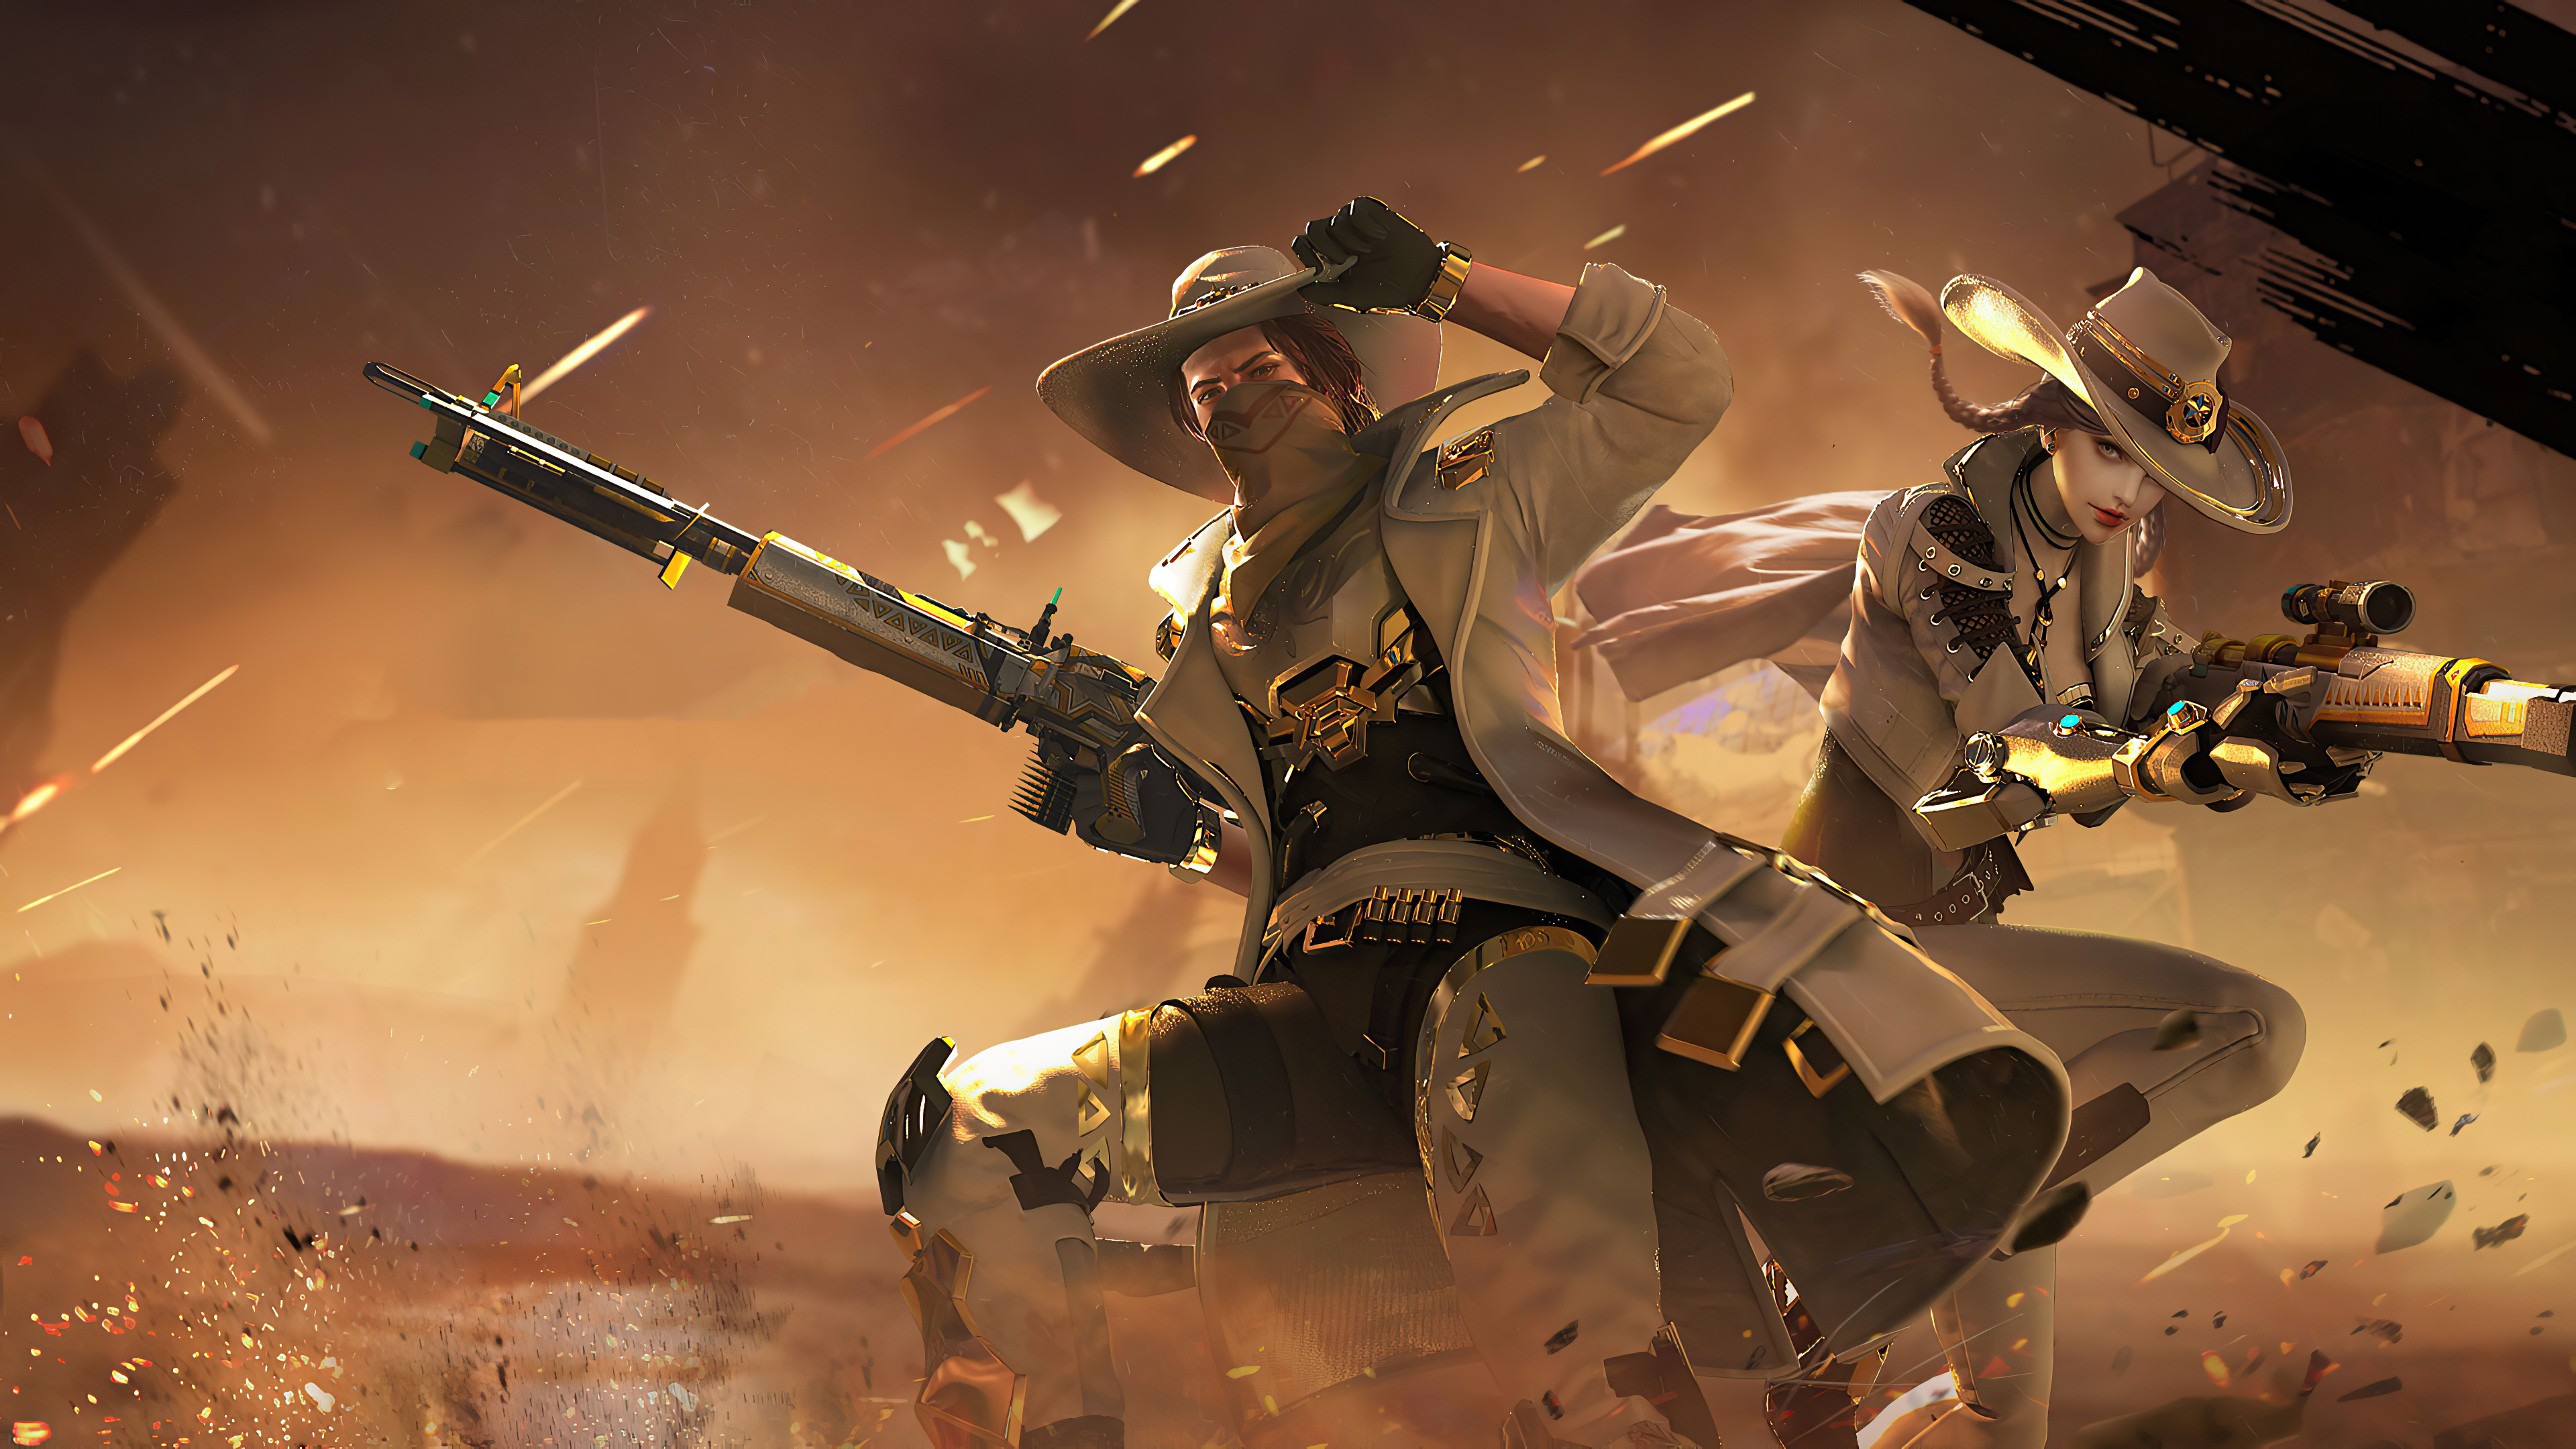 Video Game Garena Free Fire HD Wallpaper | Background Image